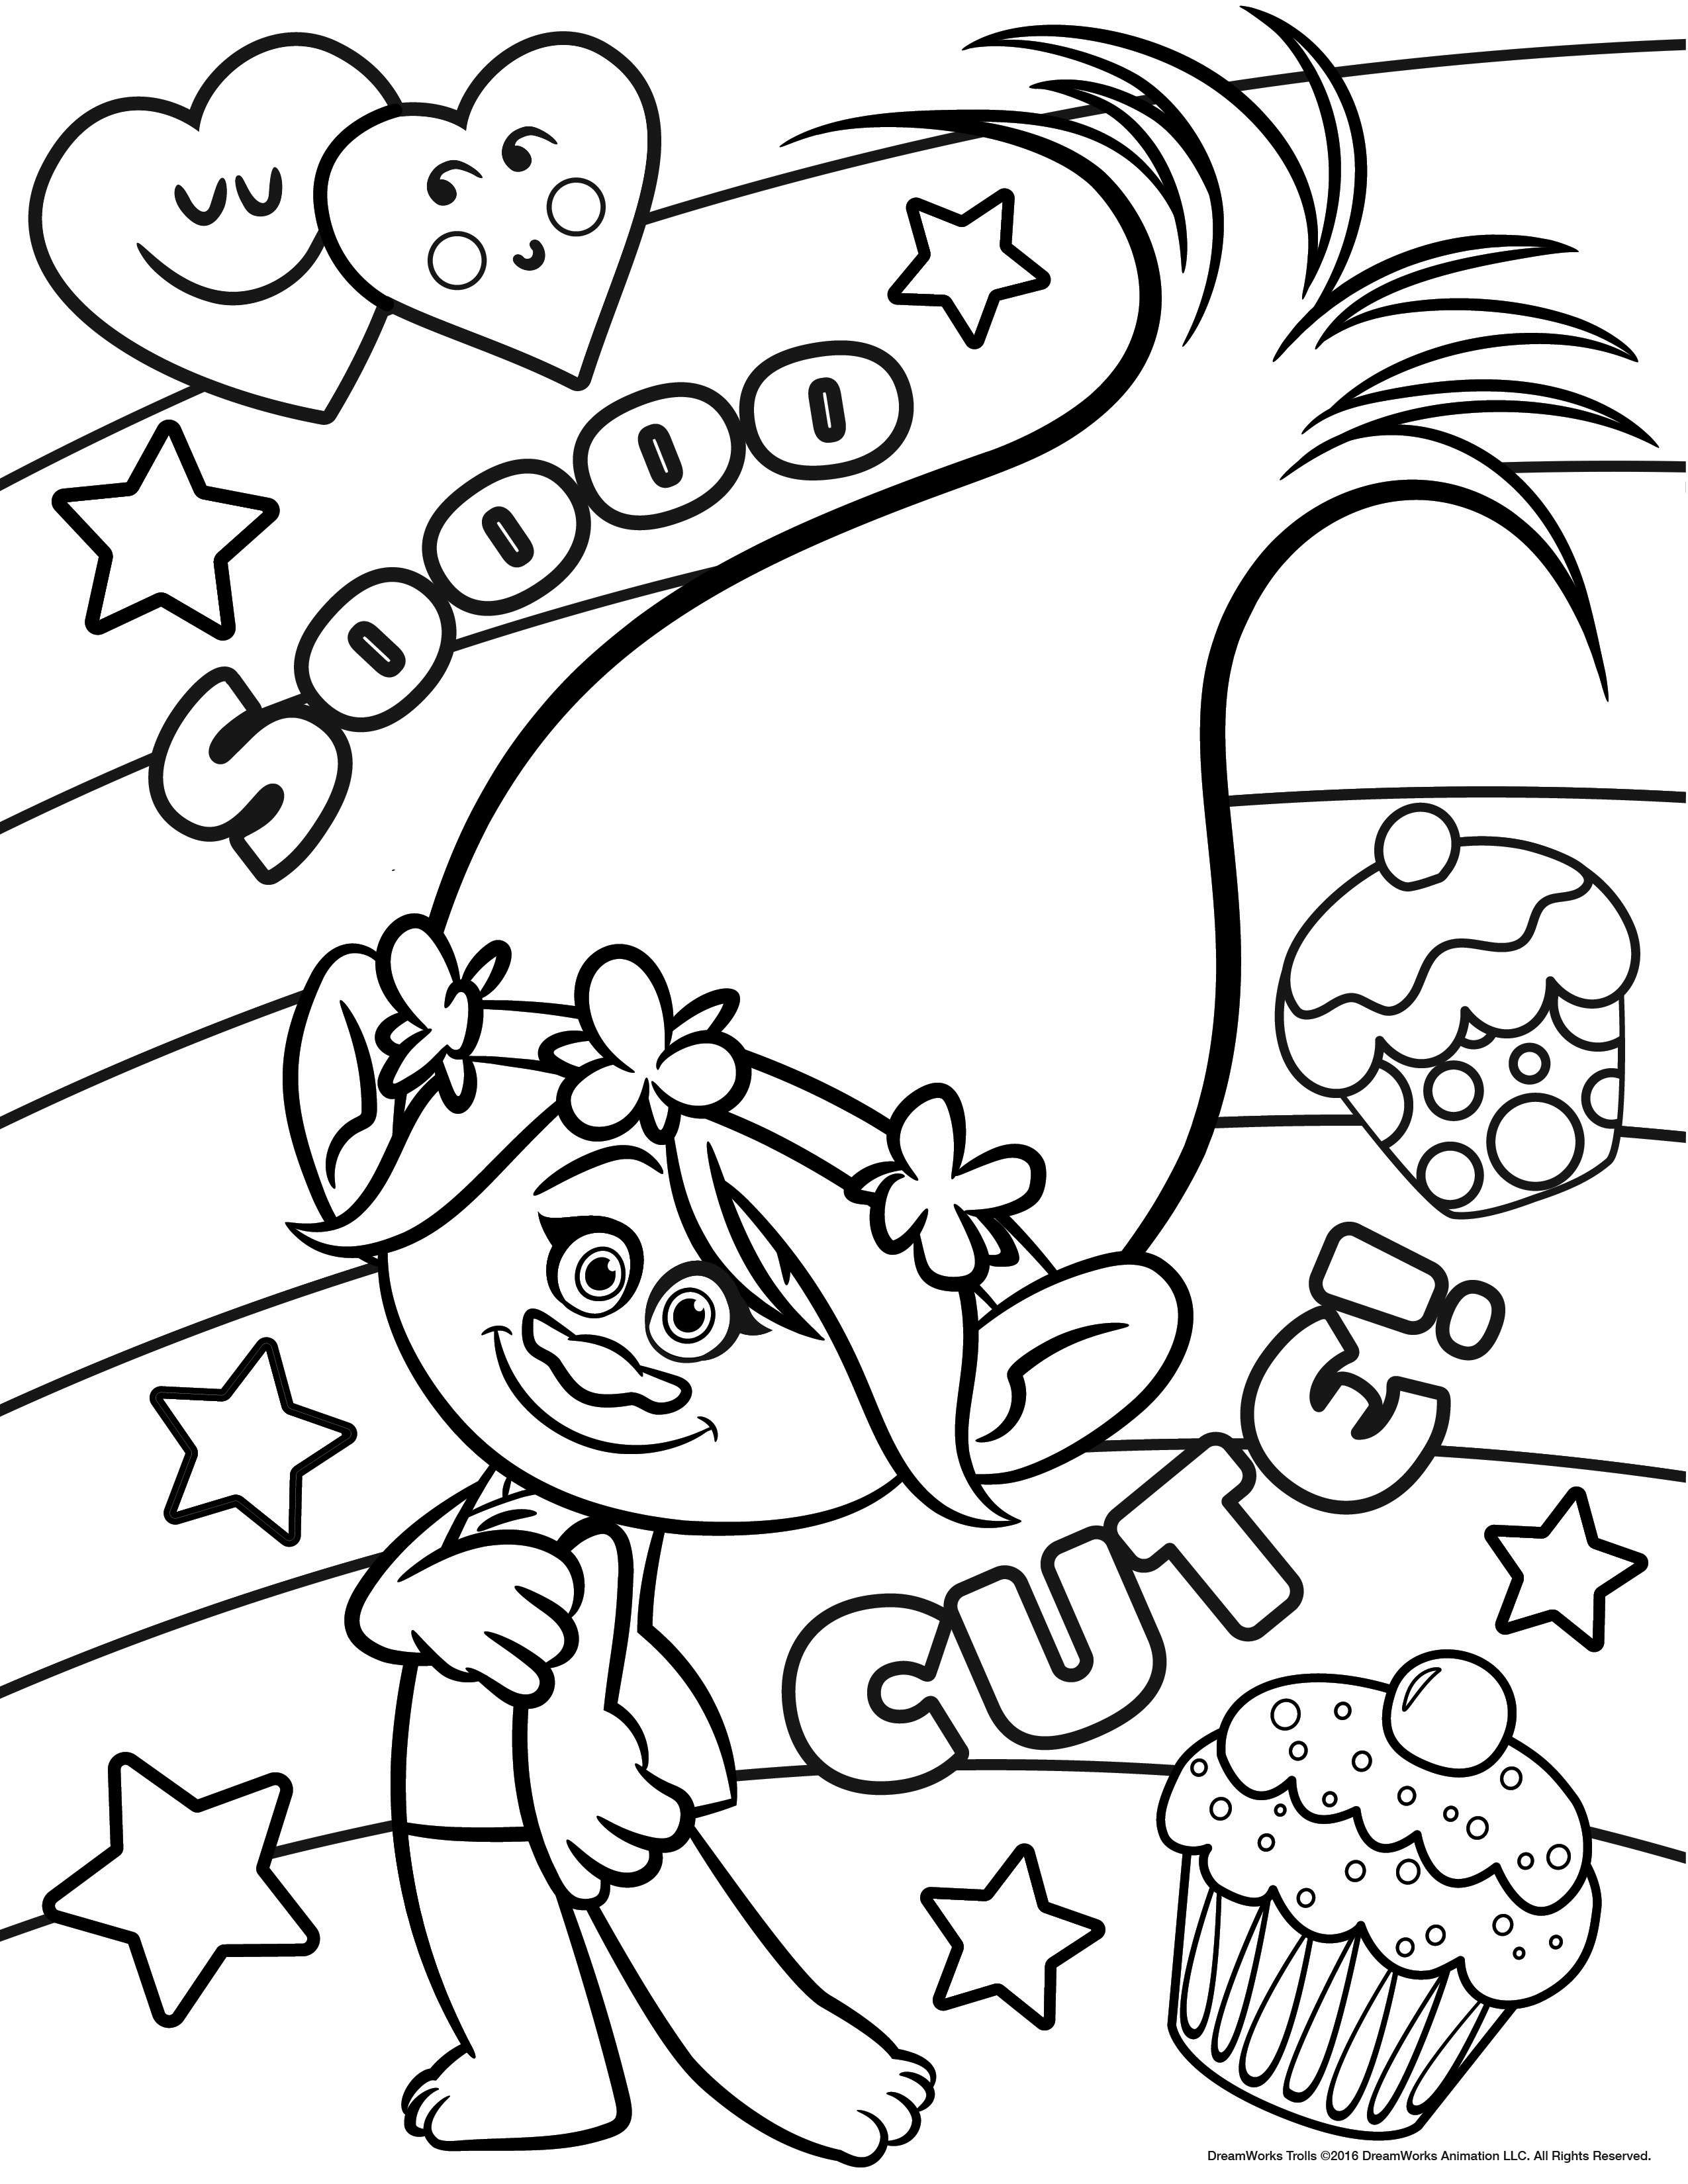 Simple Trolls coloring page to print and color for free